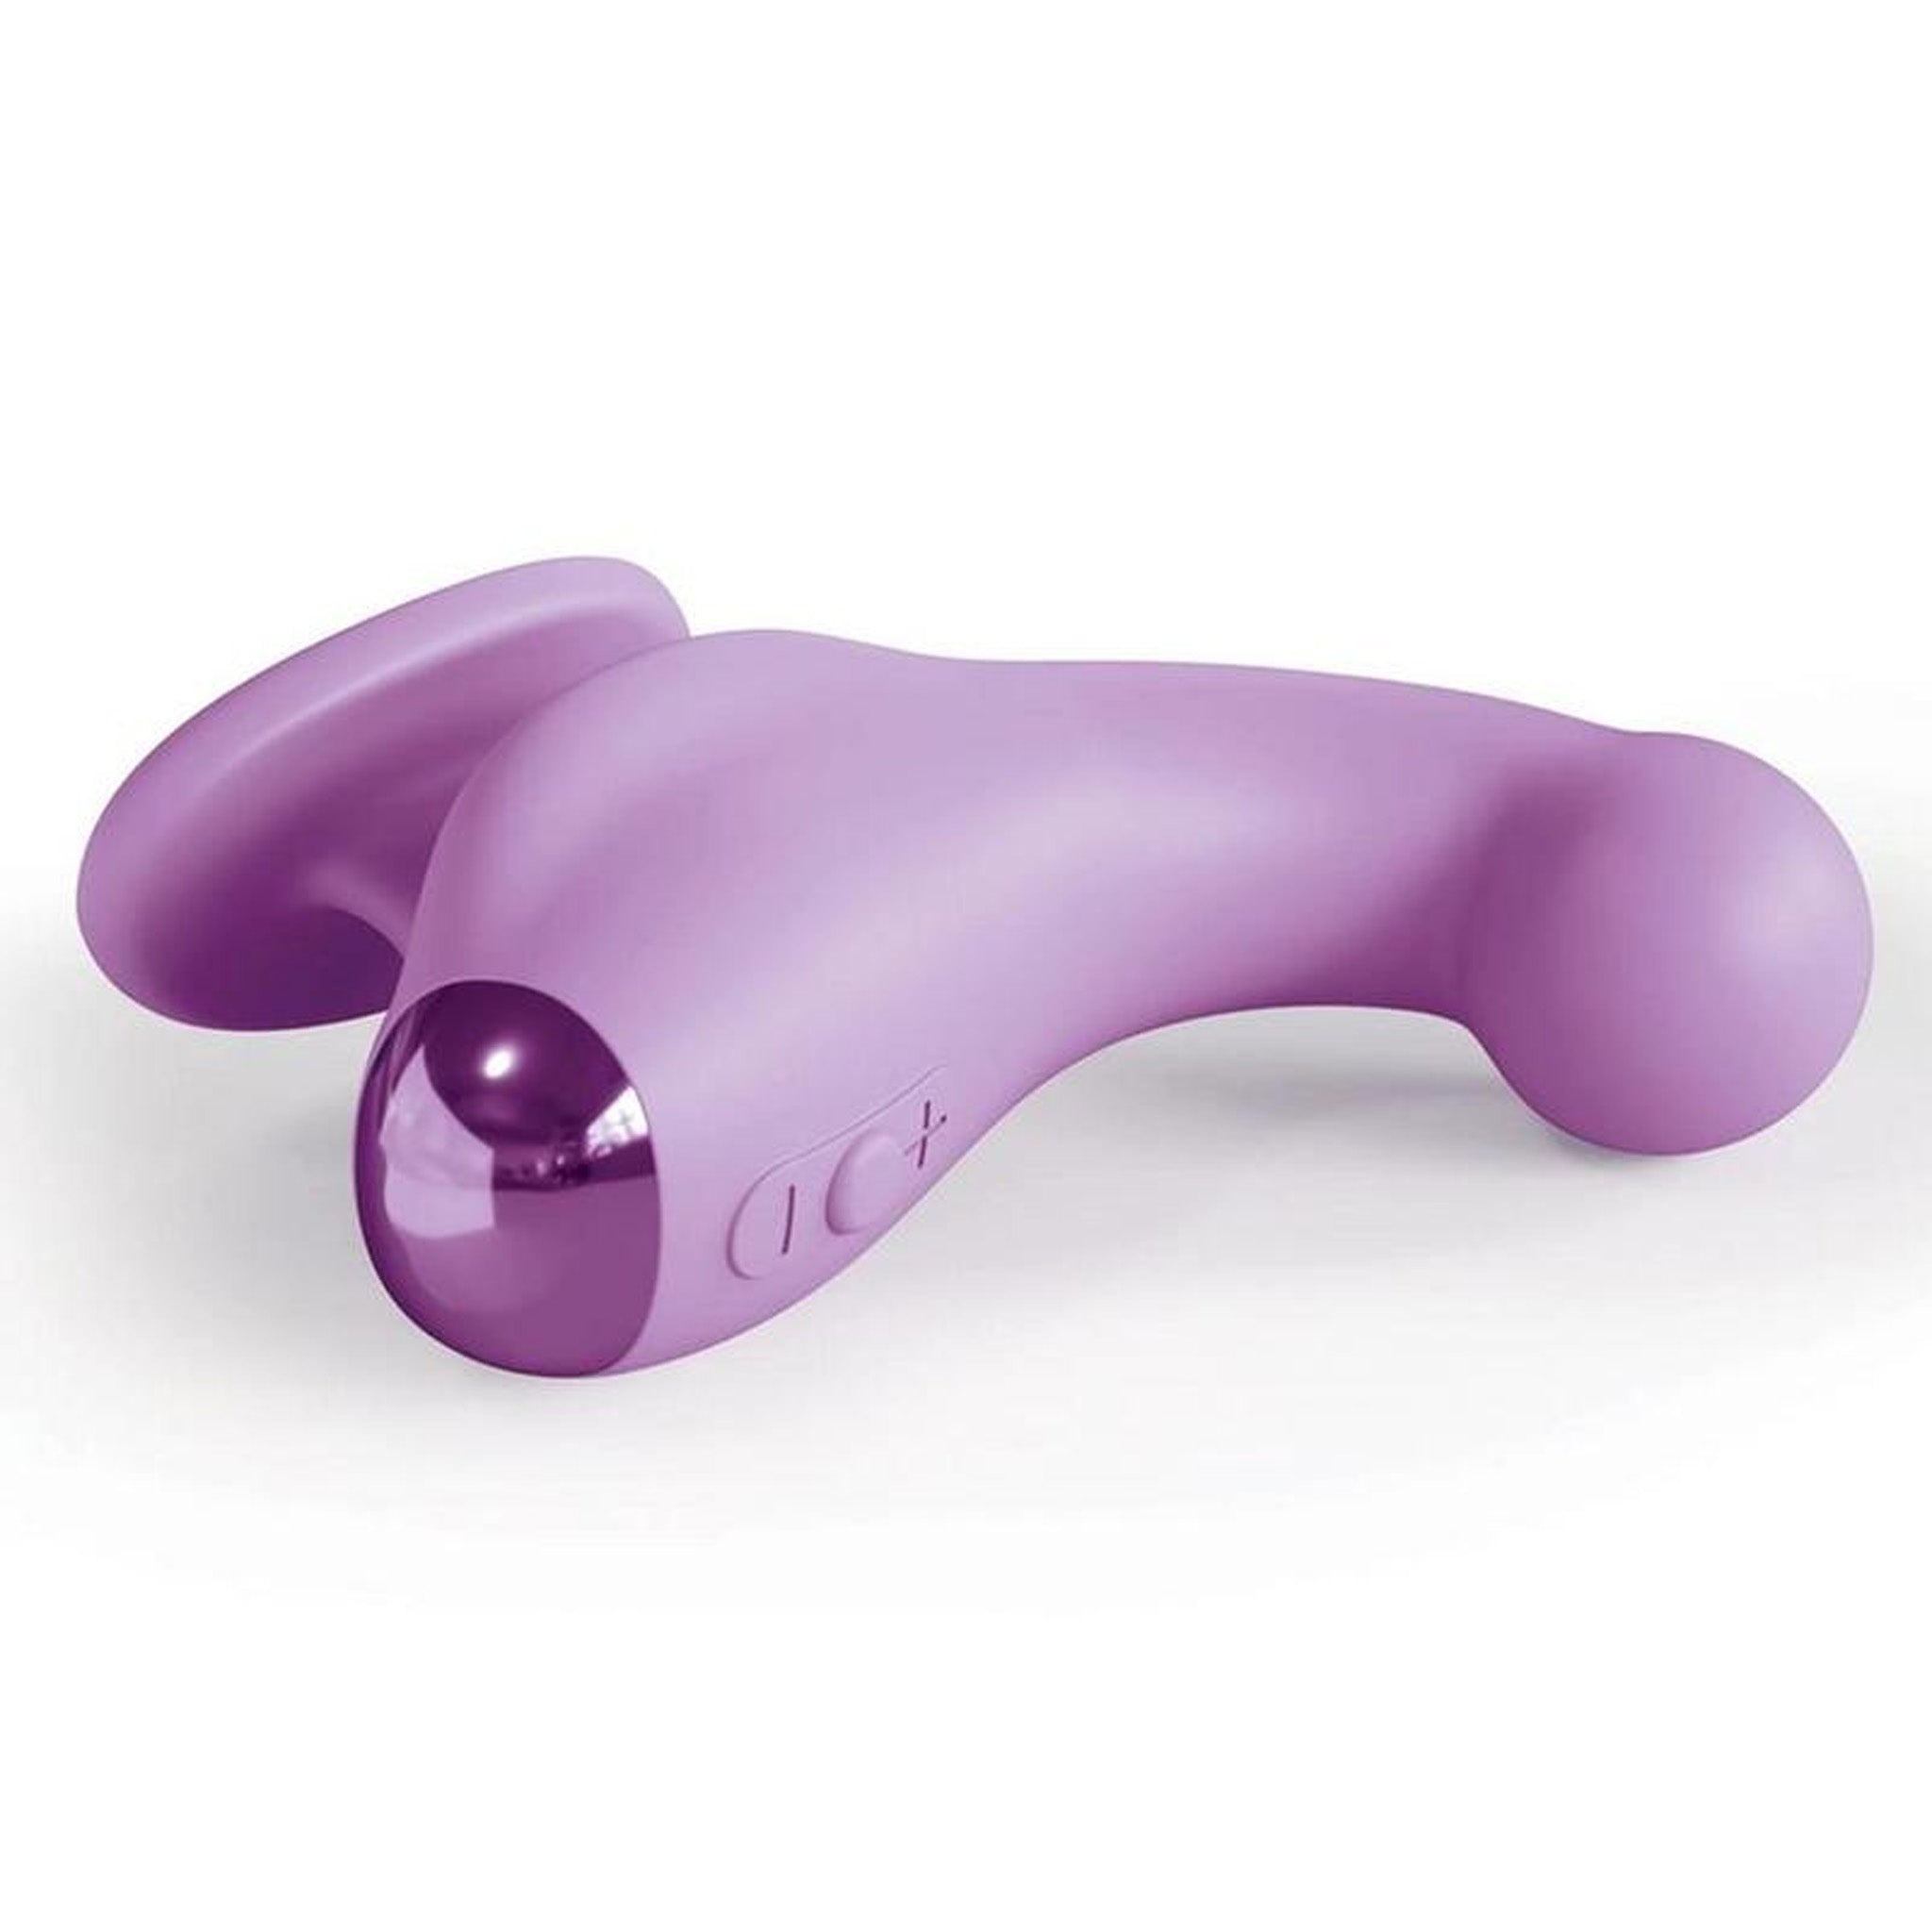 Bubble Head Curved Vibrator with Finger Grip- Purple